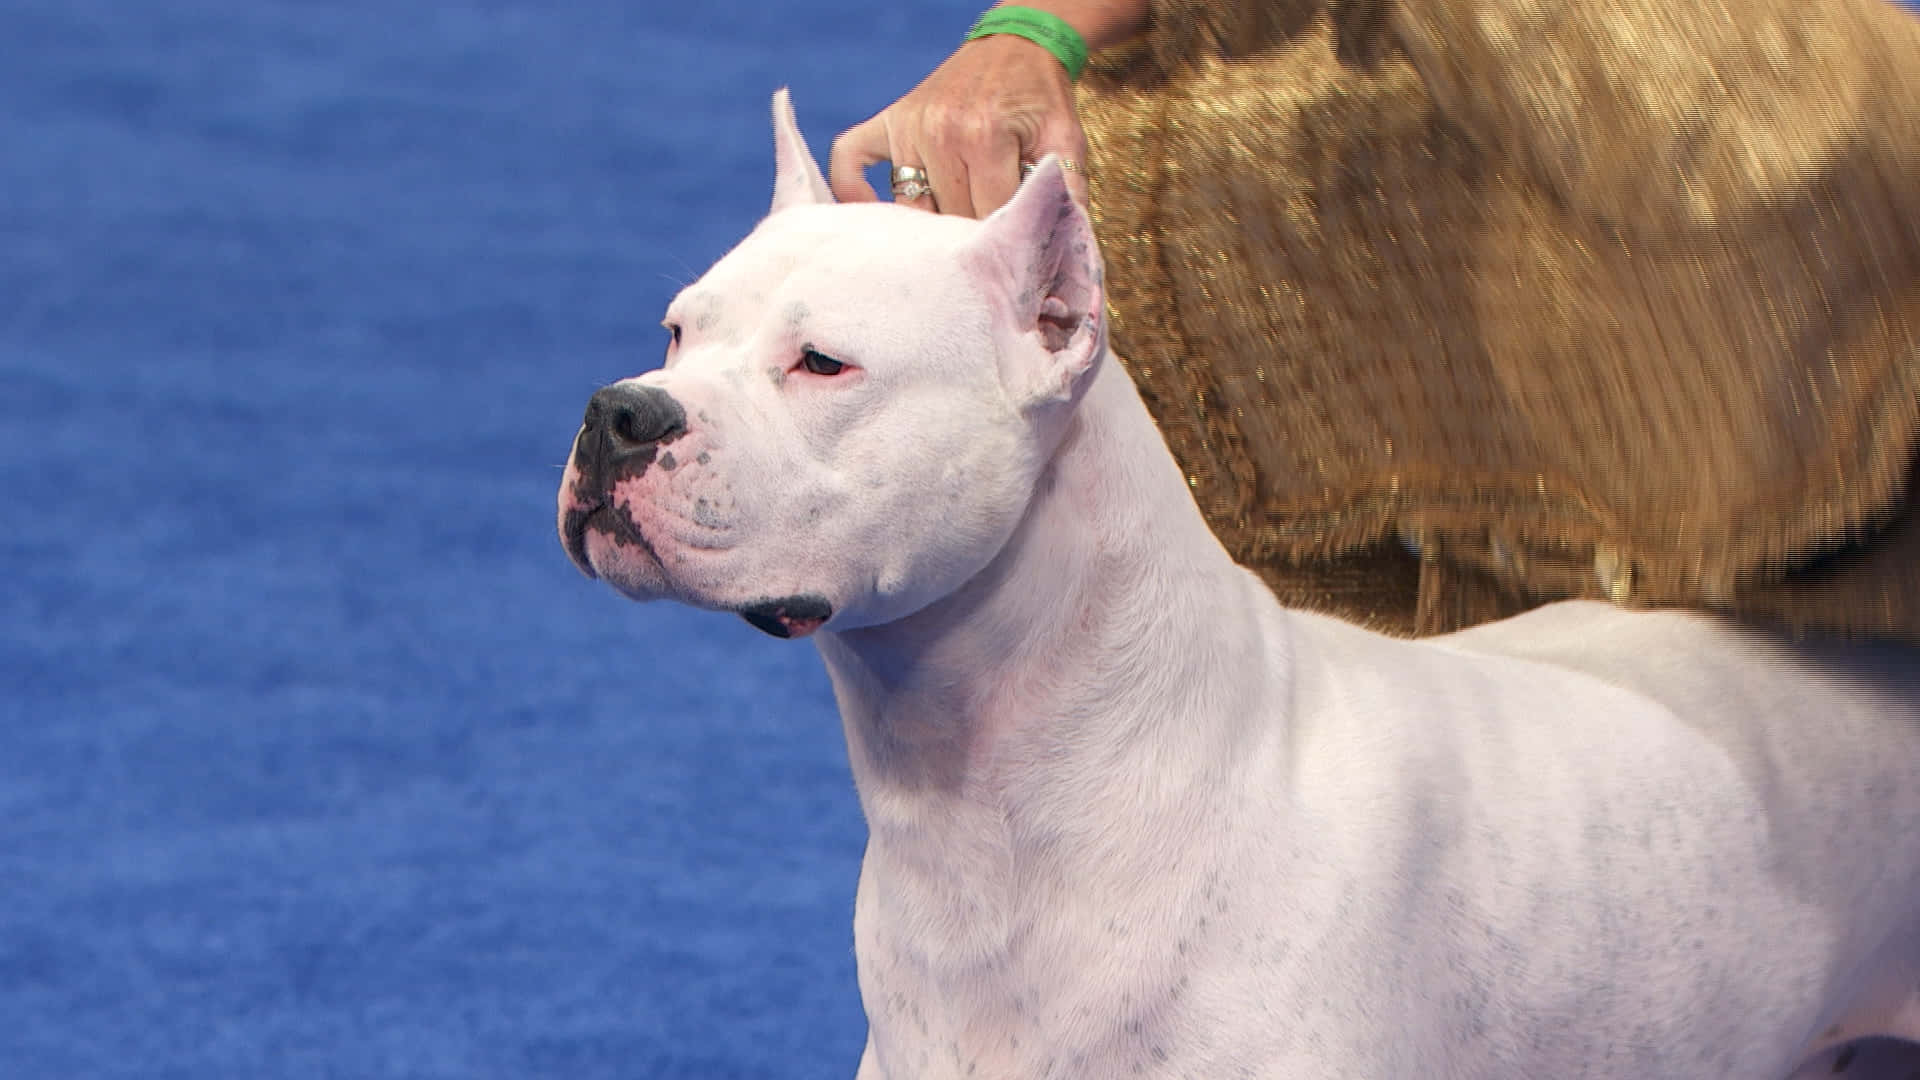 A White Dog Is Being Walked On A Blue Carpet